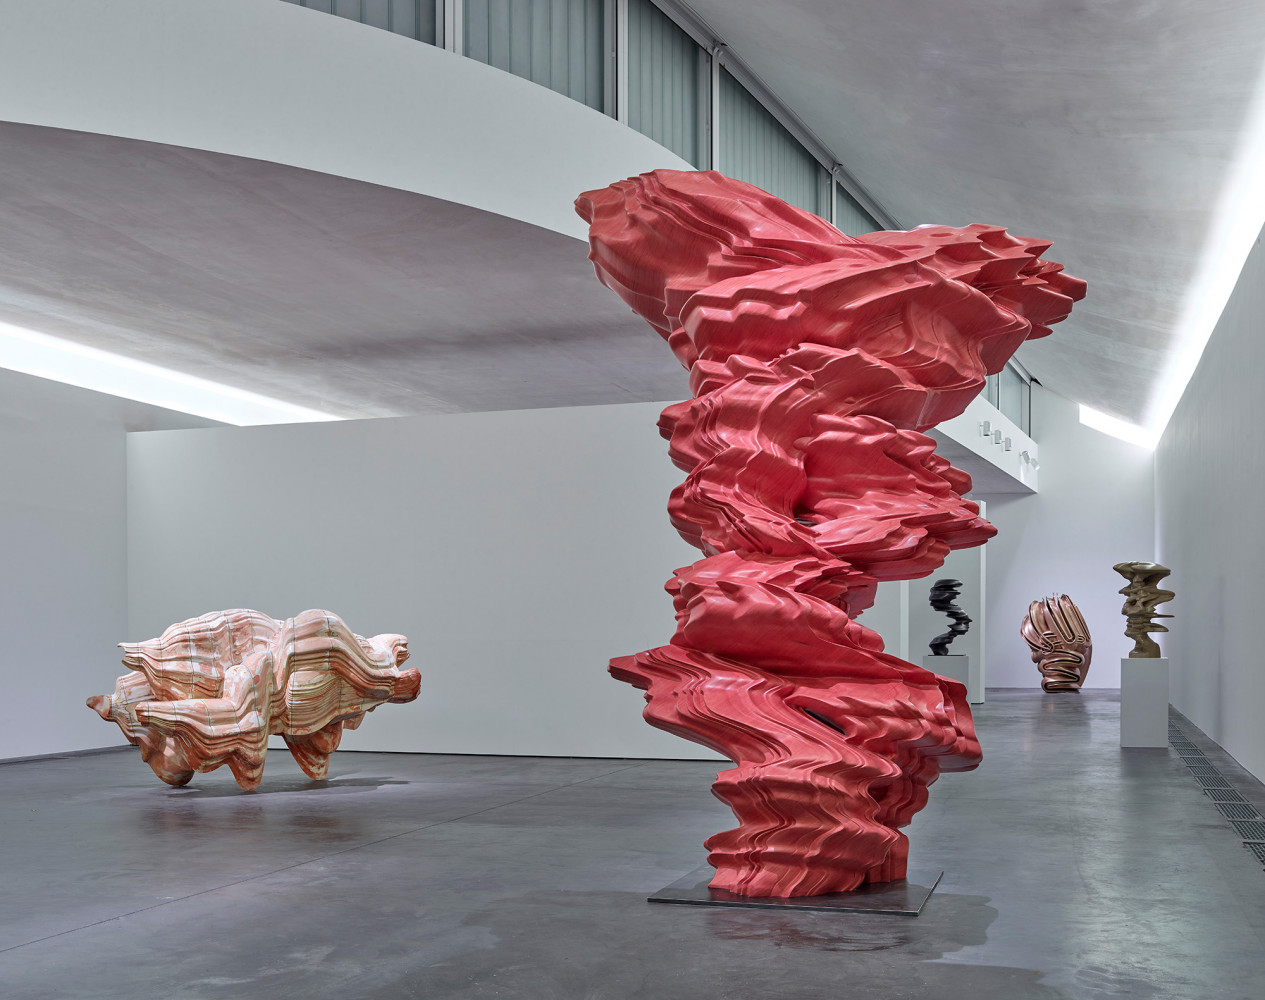 Tony Cragg, ‘Made on Earth, Heart Museum, Herning, DK’, Installation view, 2022